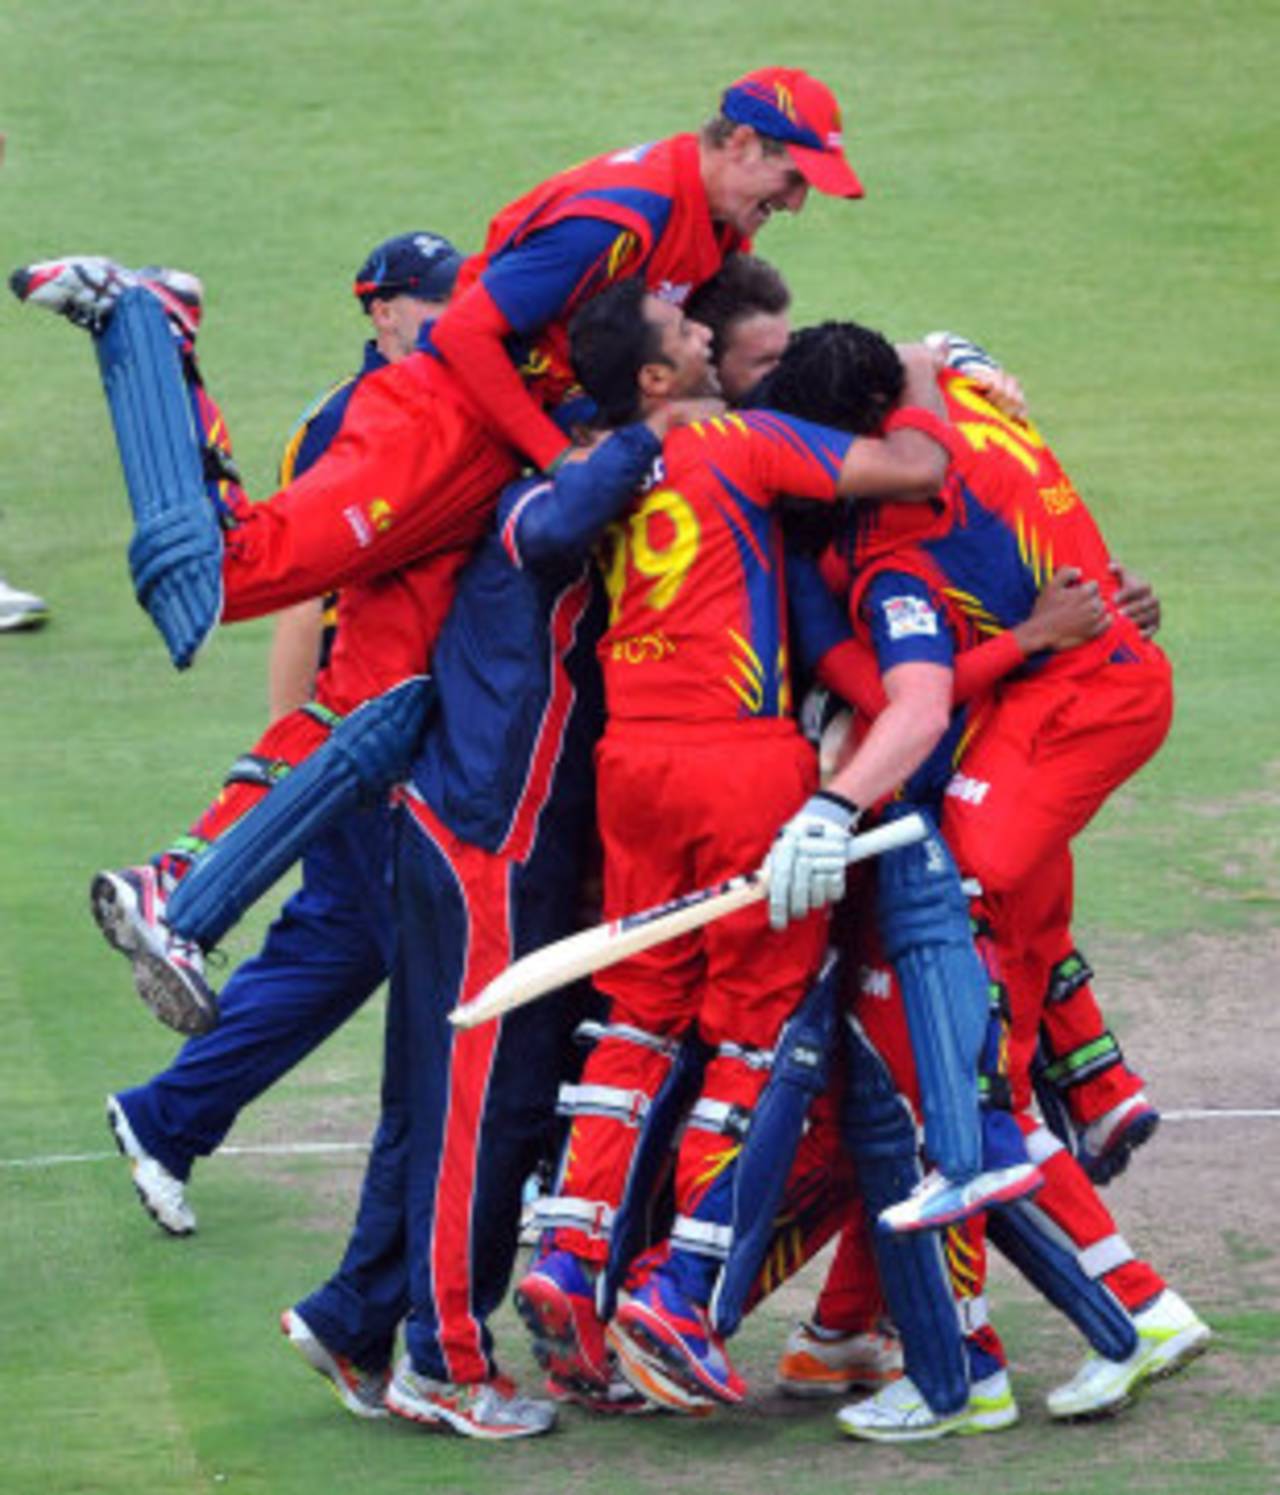 Lions are a picture of joy after qualifying for the semi-finals, Lions v Yorkshire, Champions League T20, Group B, Johannesburg, October 20, 2012